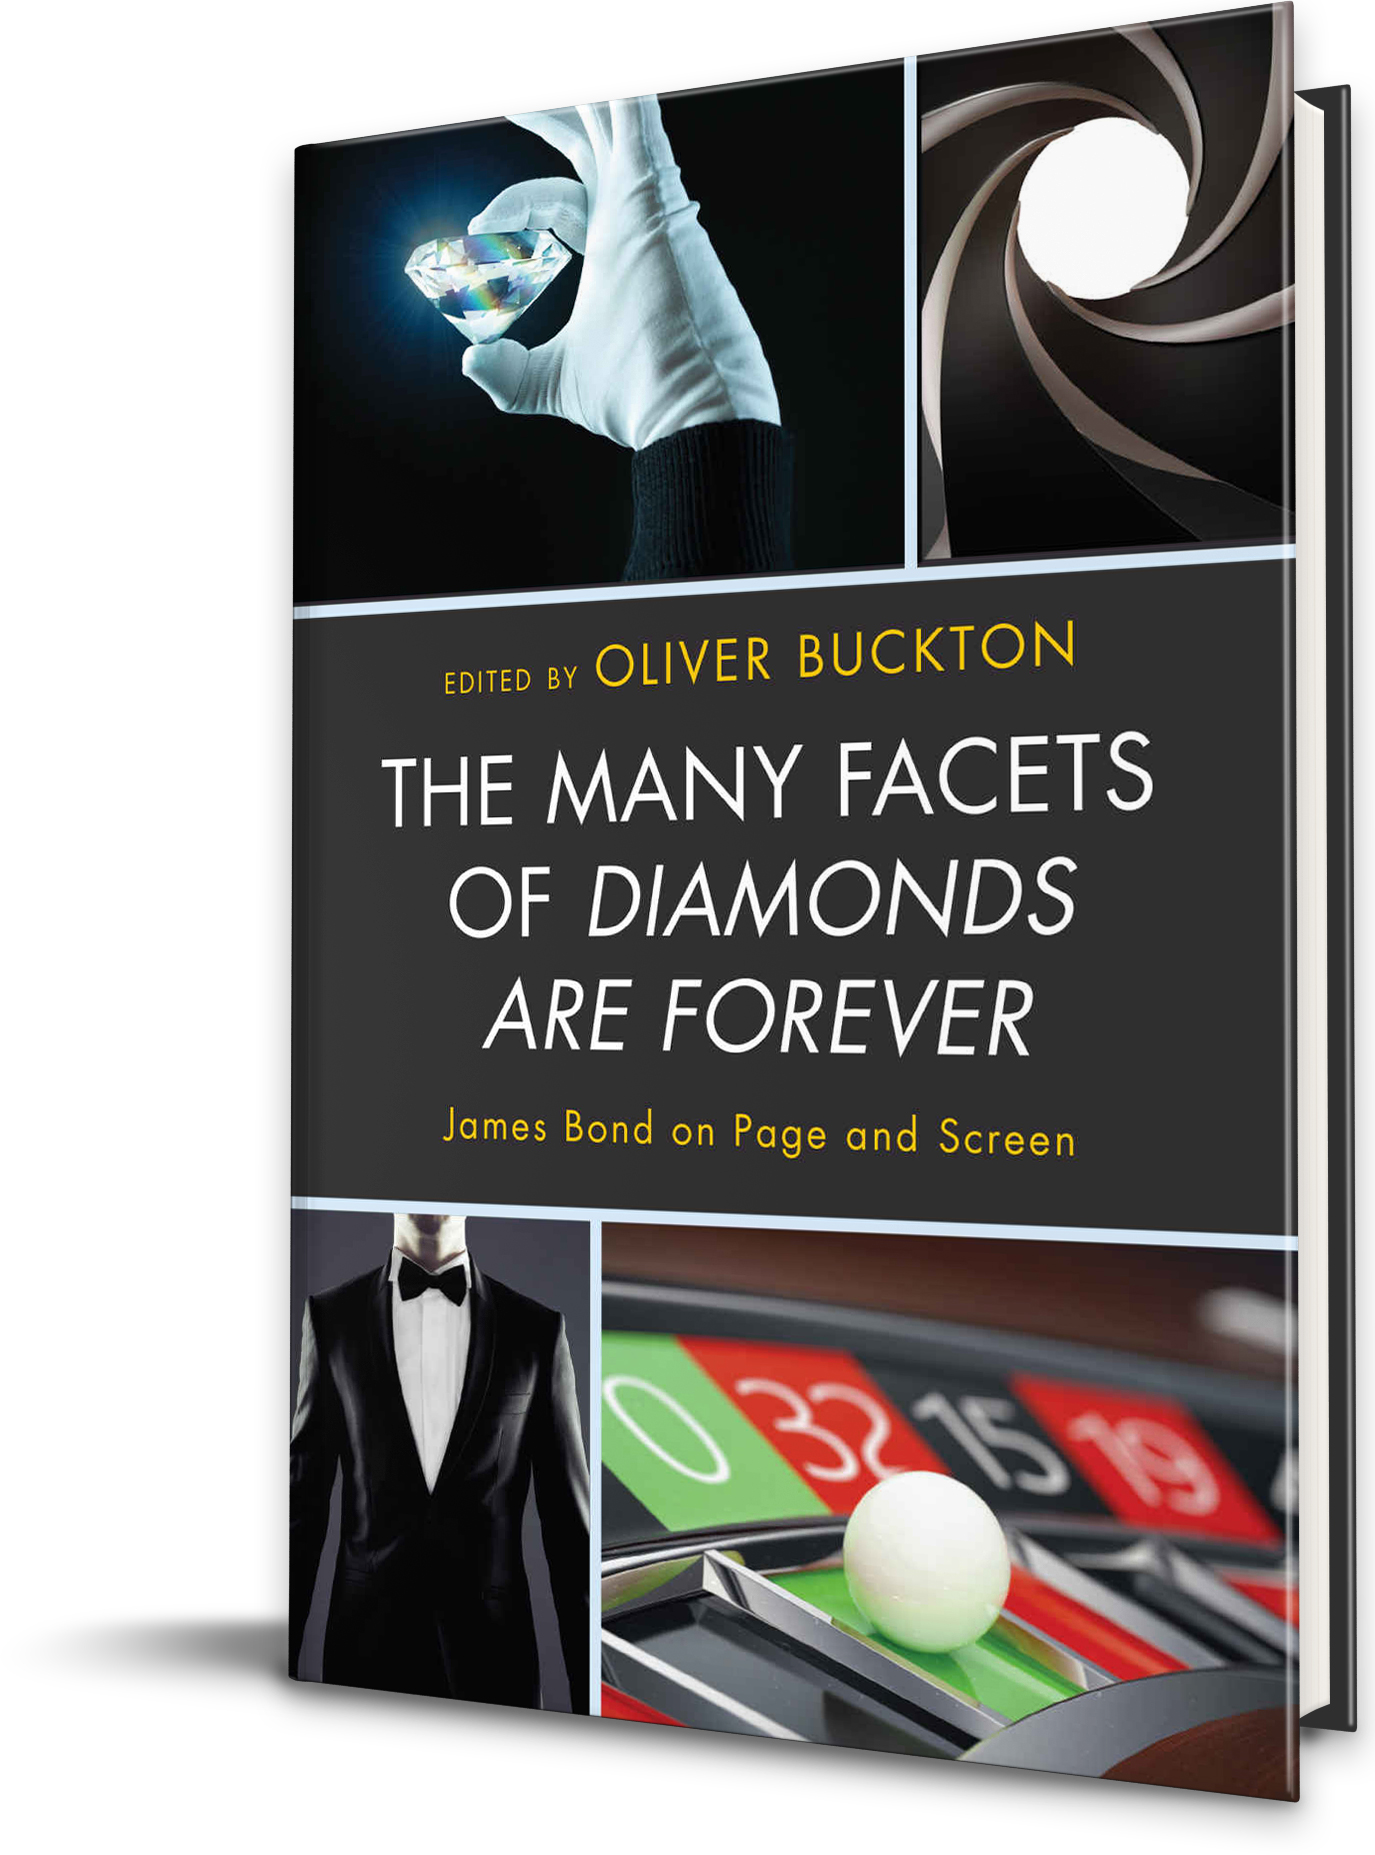 The Many Facets of Diamonds Are Forever: James Bond on Page and Screen